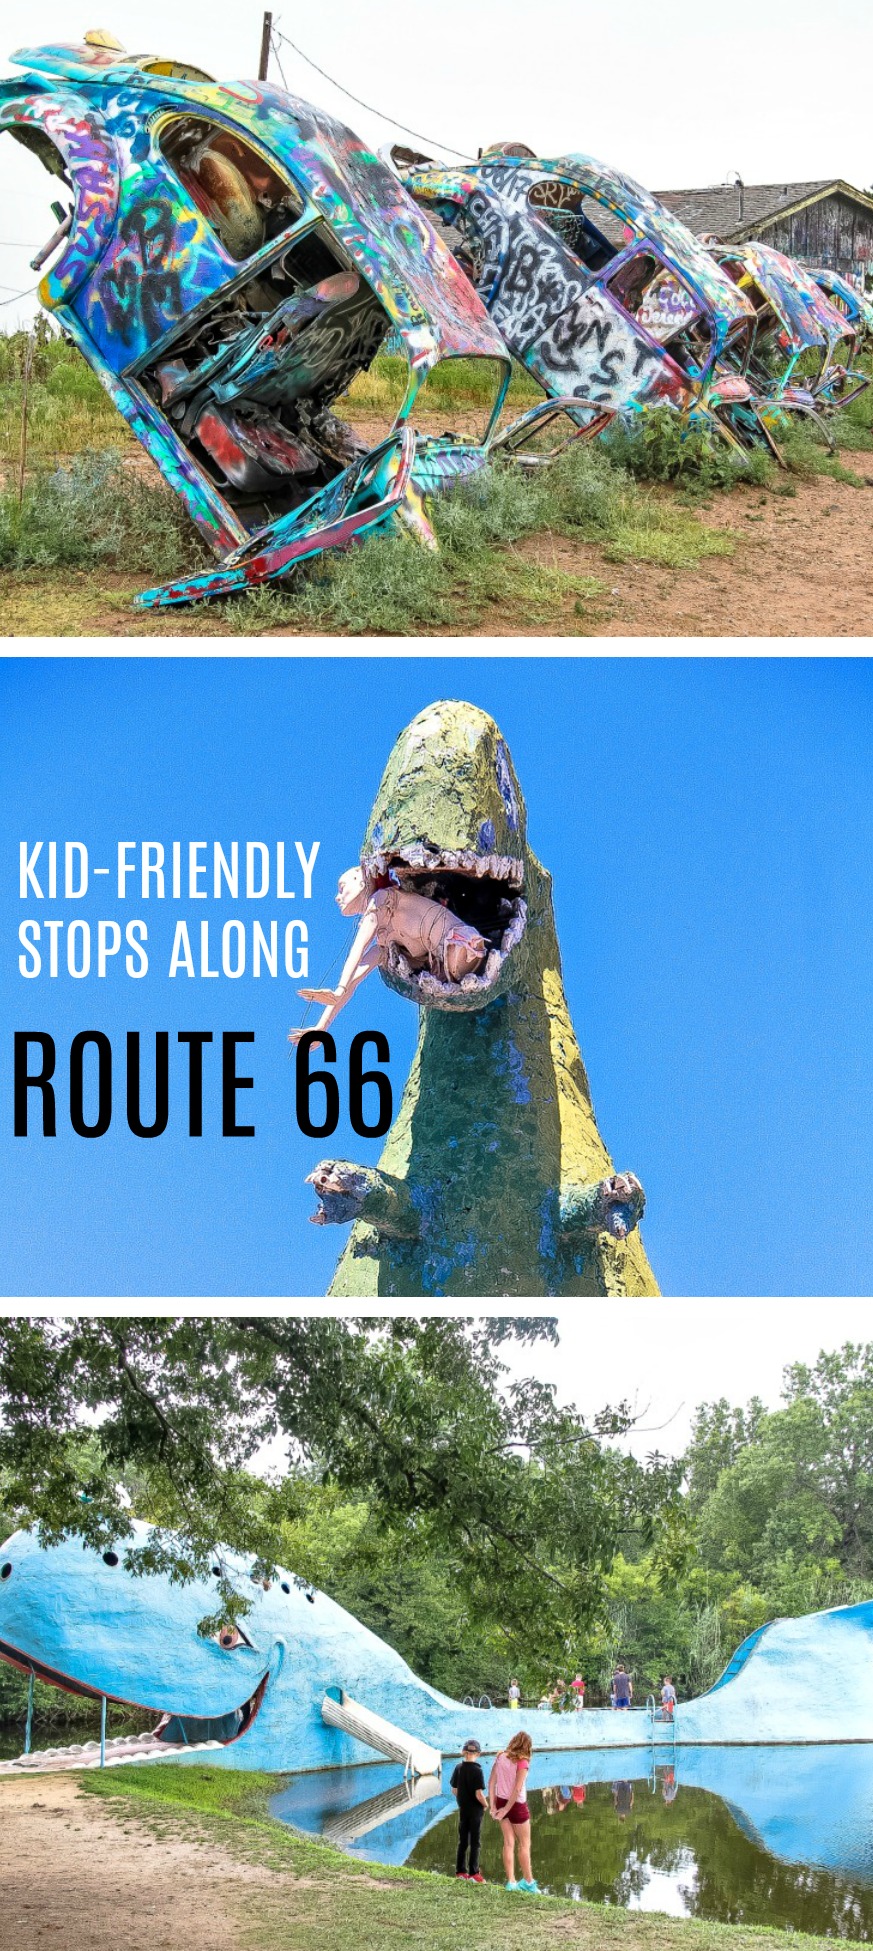 U.S route 66 fun road trip stops with kids Pinterest image